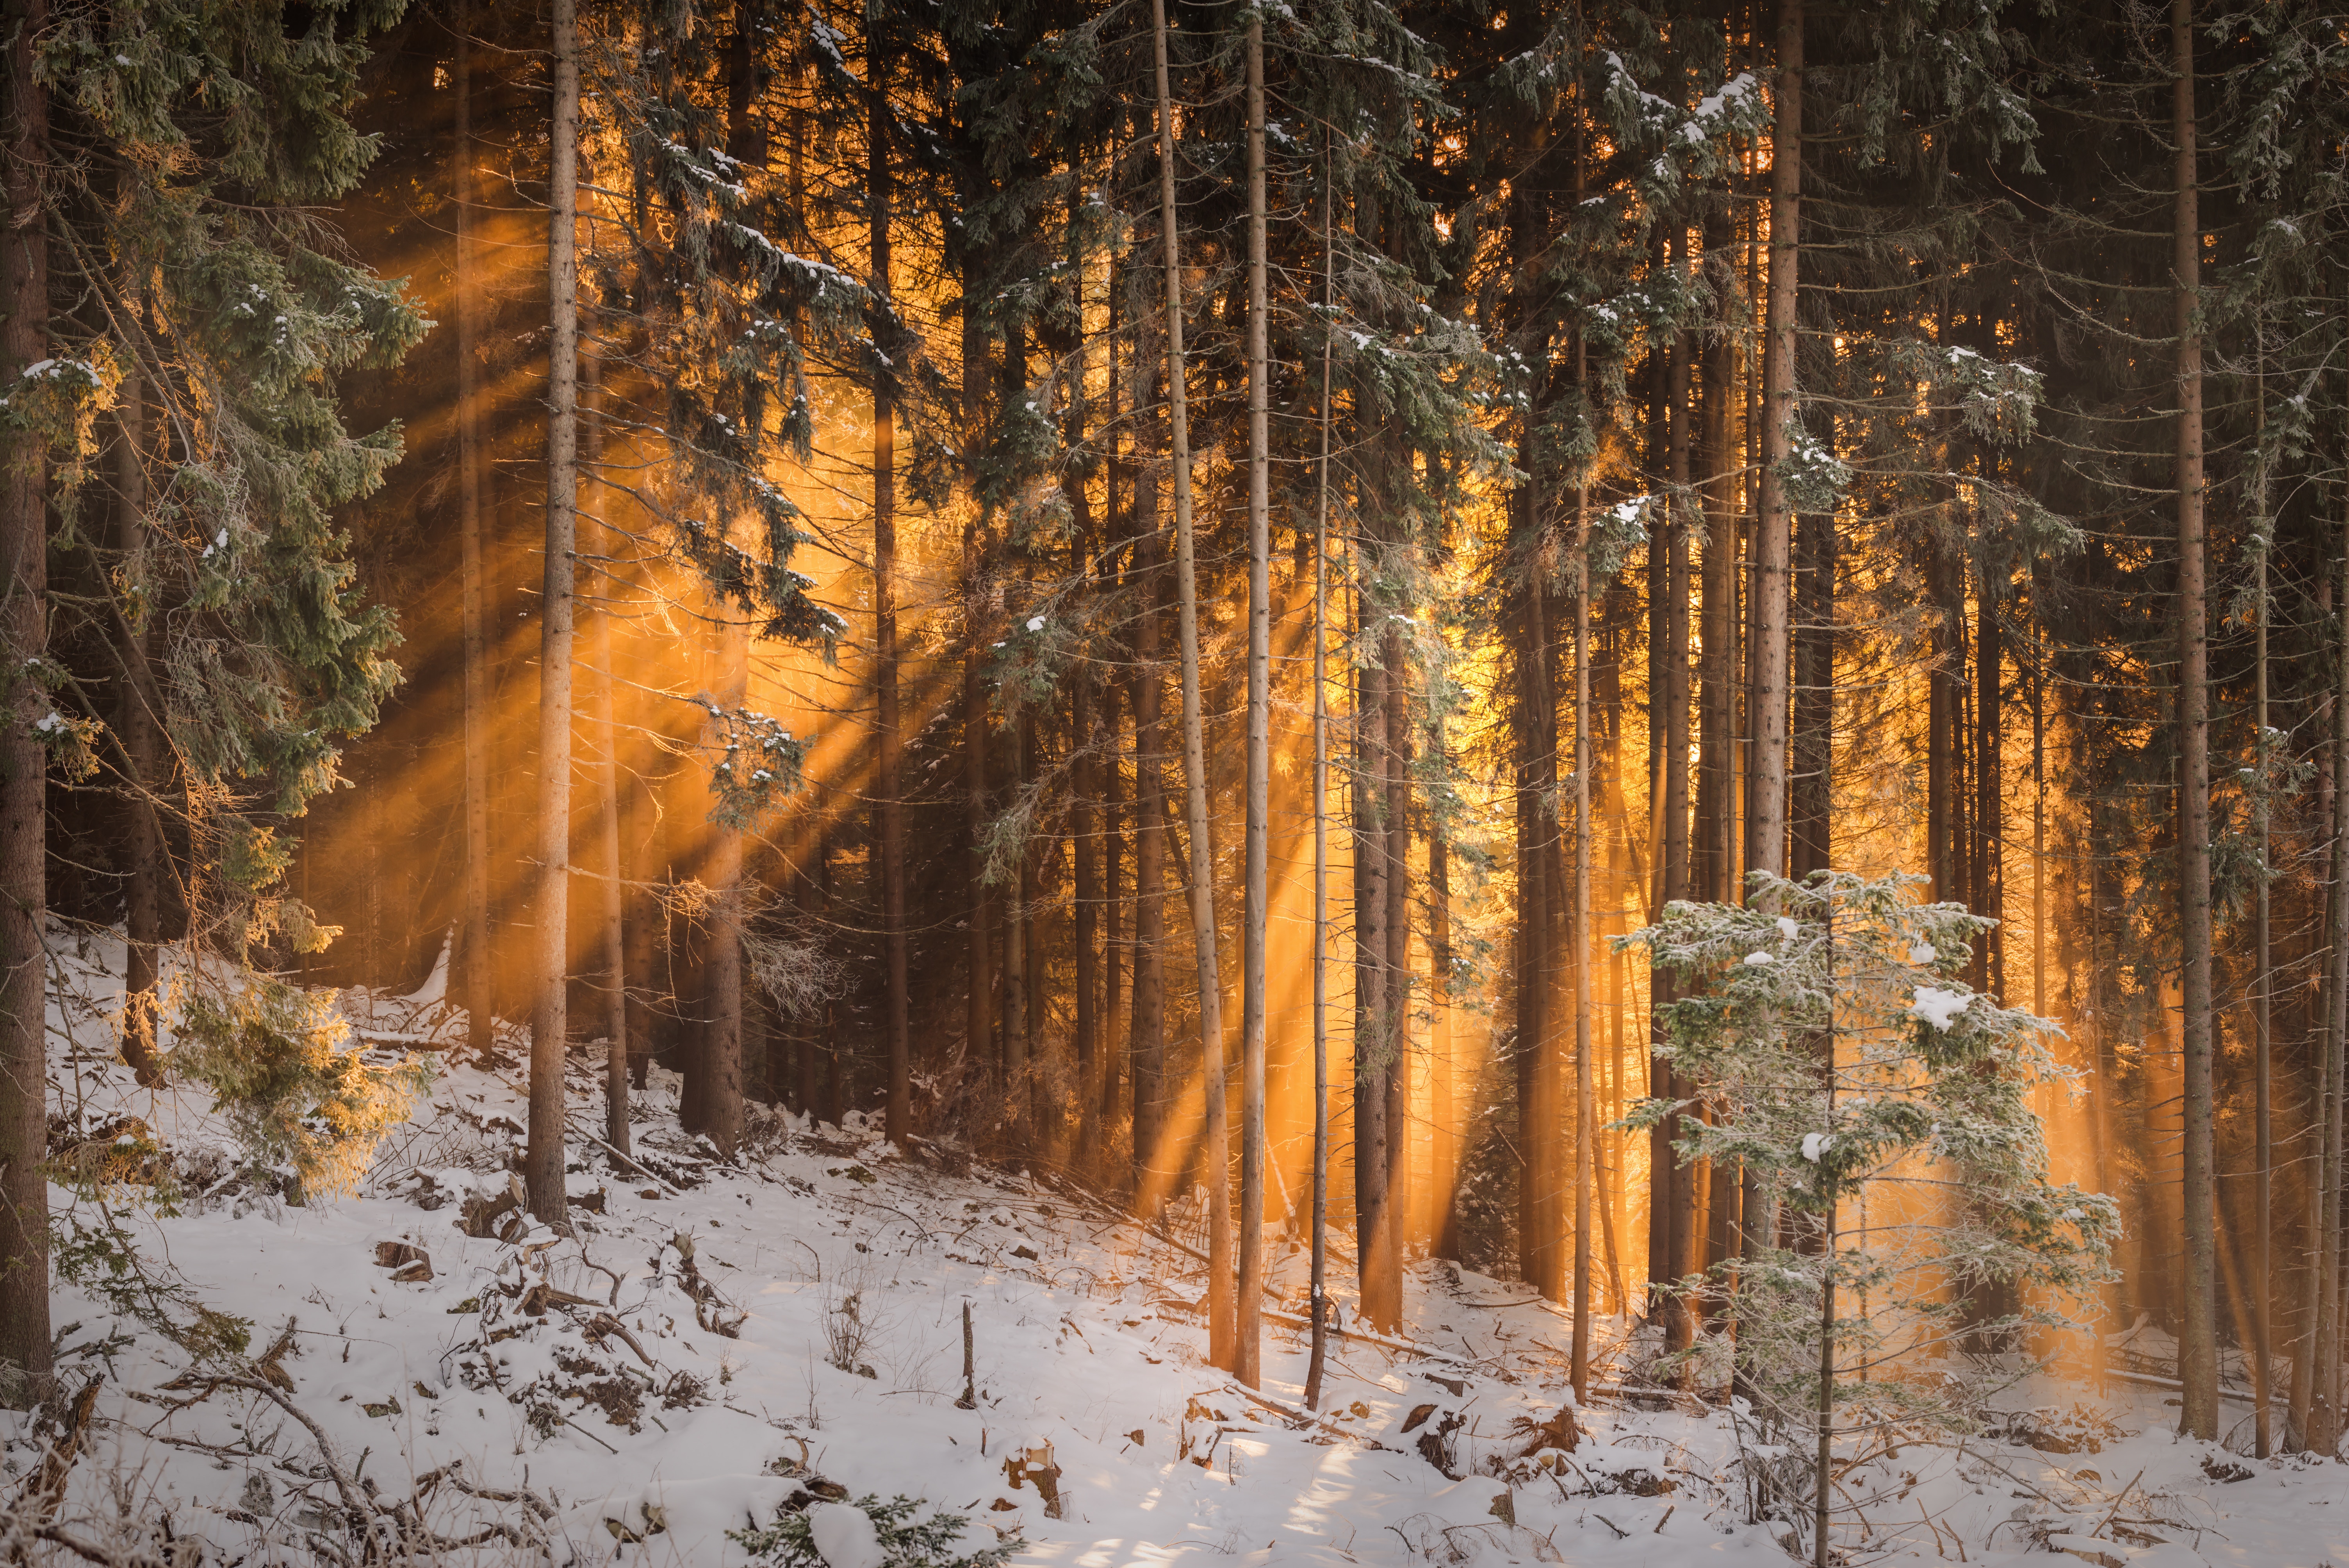 sunlight, nature, forest, trees, winter iphone wallpaper